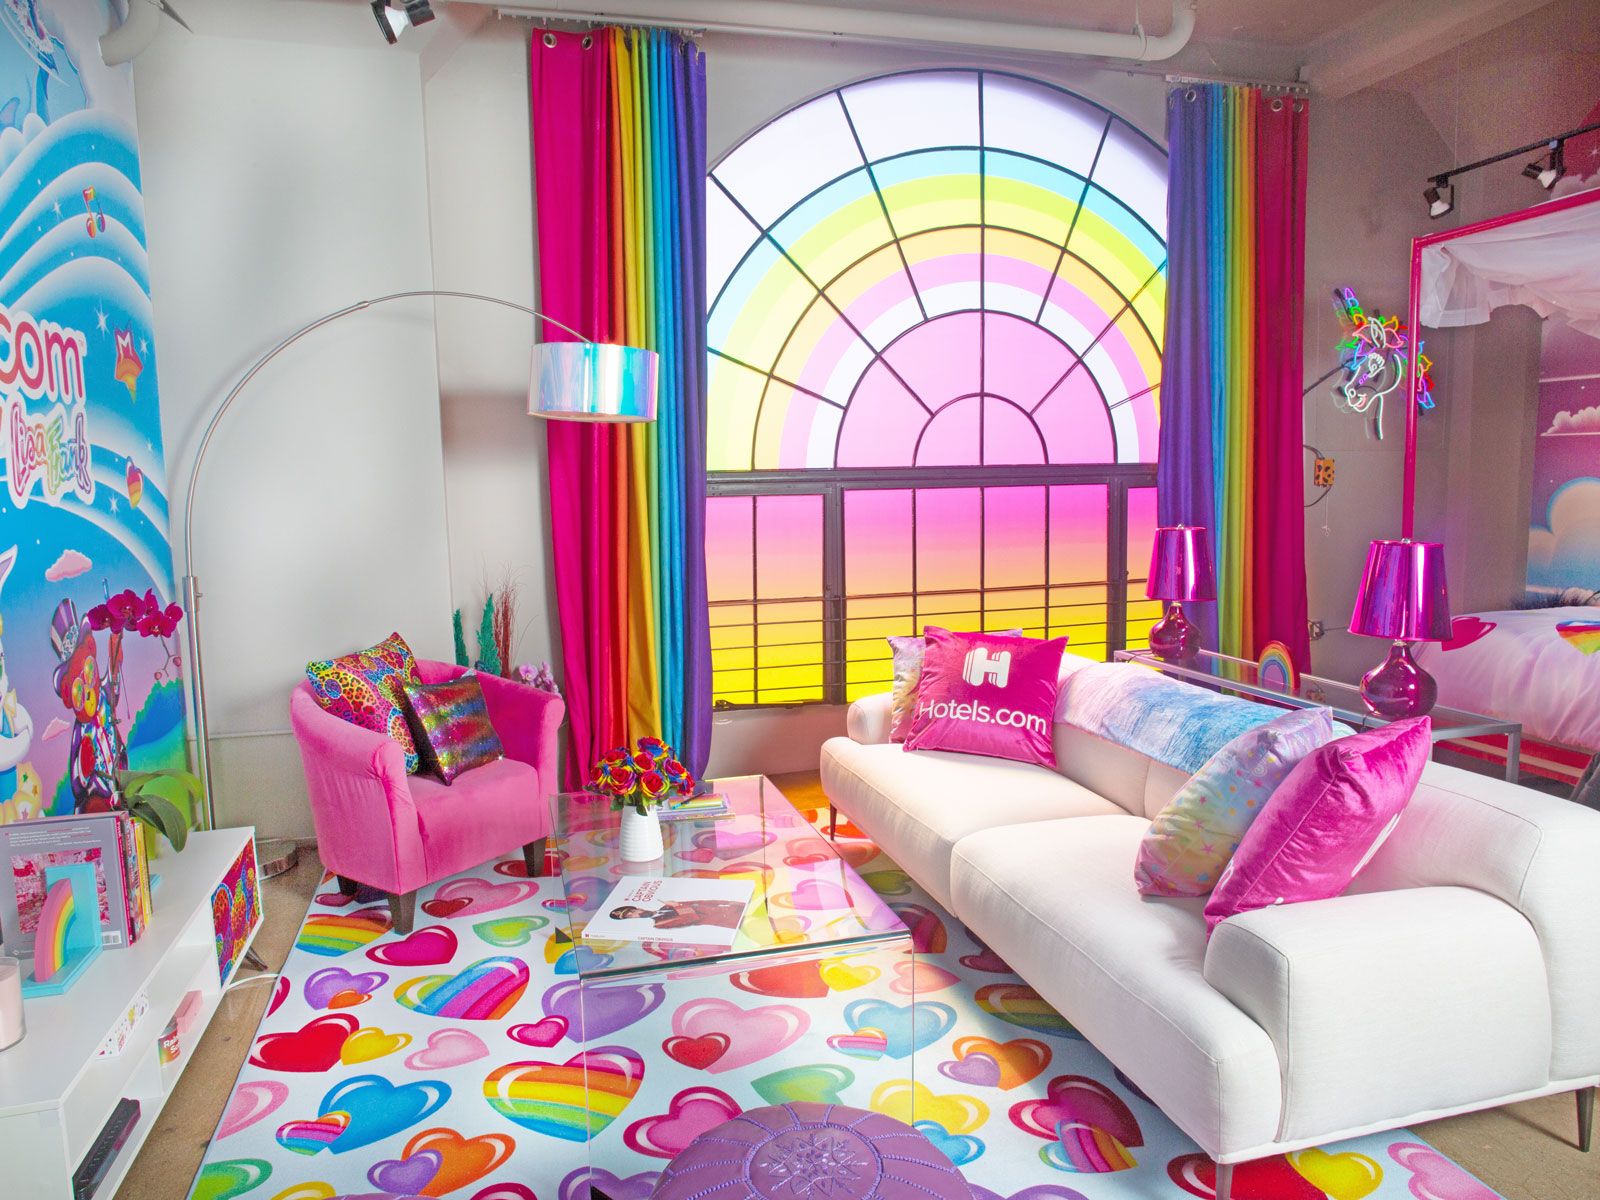 This Lisa Frank Themed Hotel Room Is Stocked With '90s Snacks